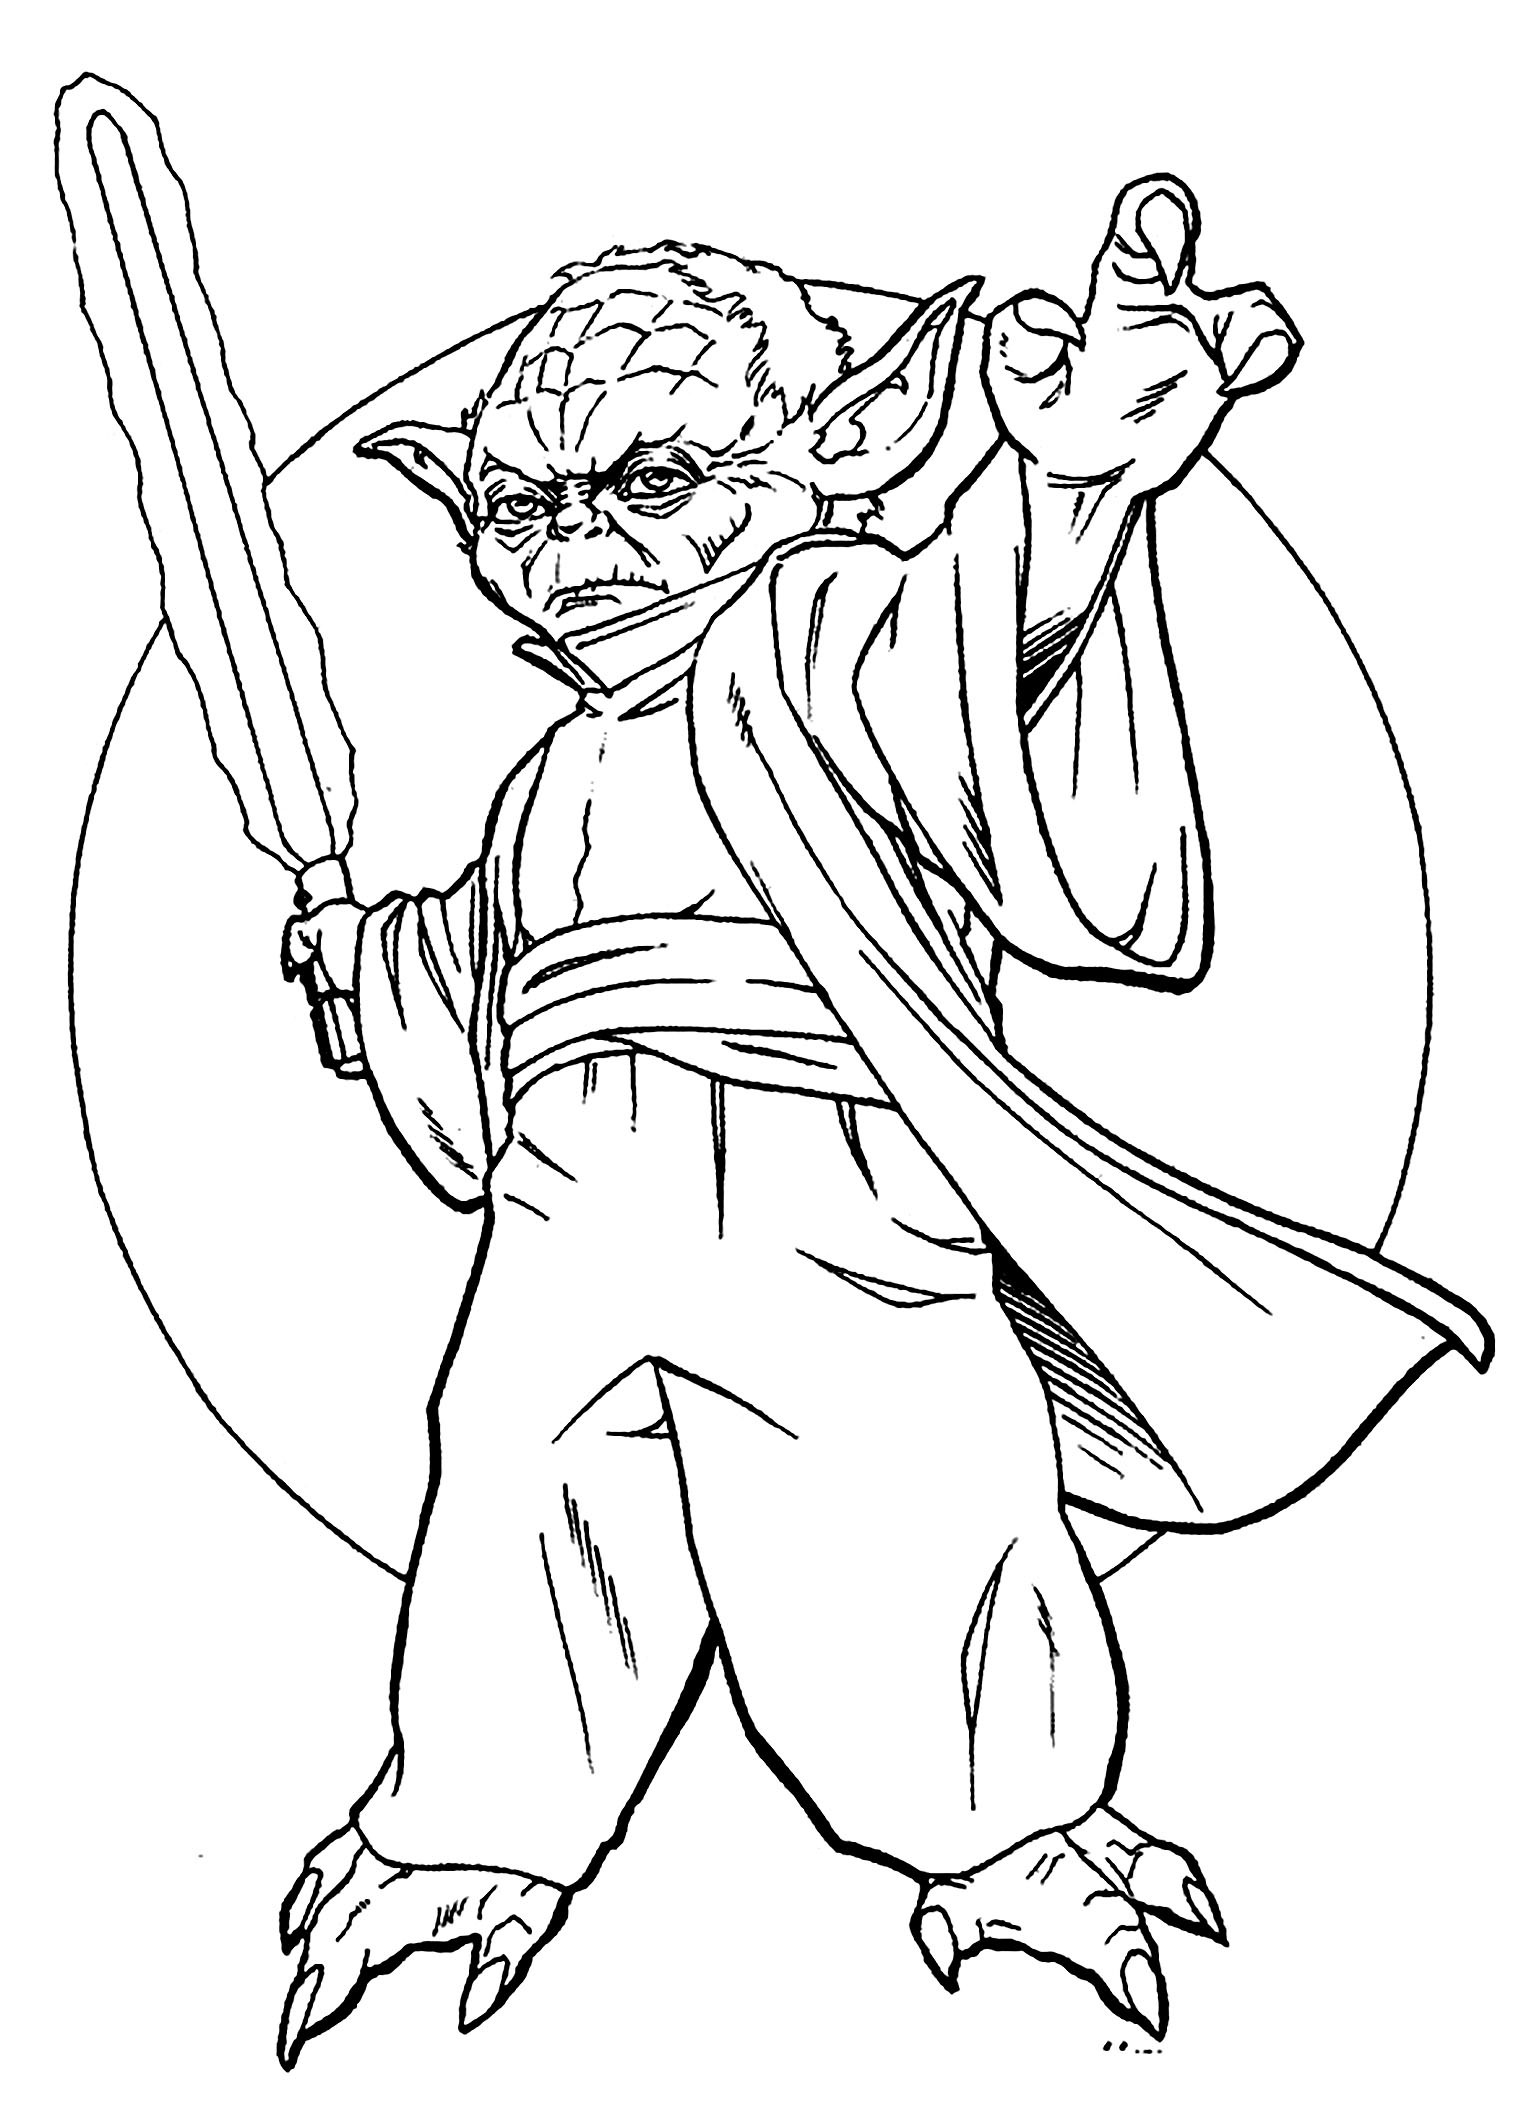 Star Wars Coloring Pages For Kids
 Star wars to color for children Star Wars Kids Coloring